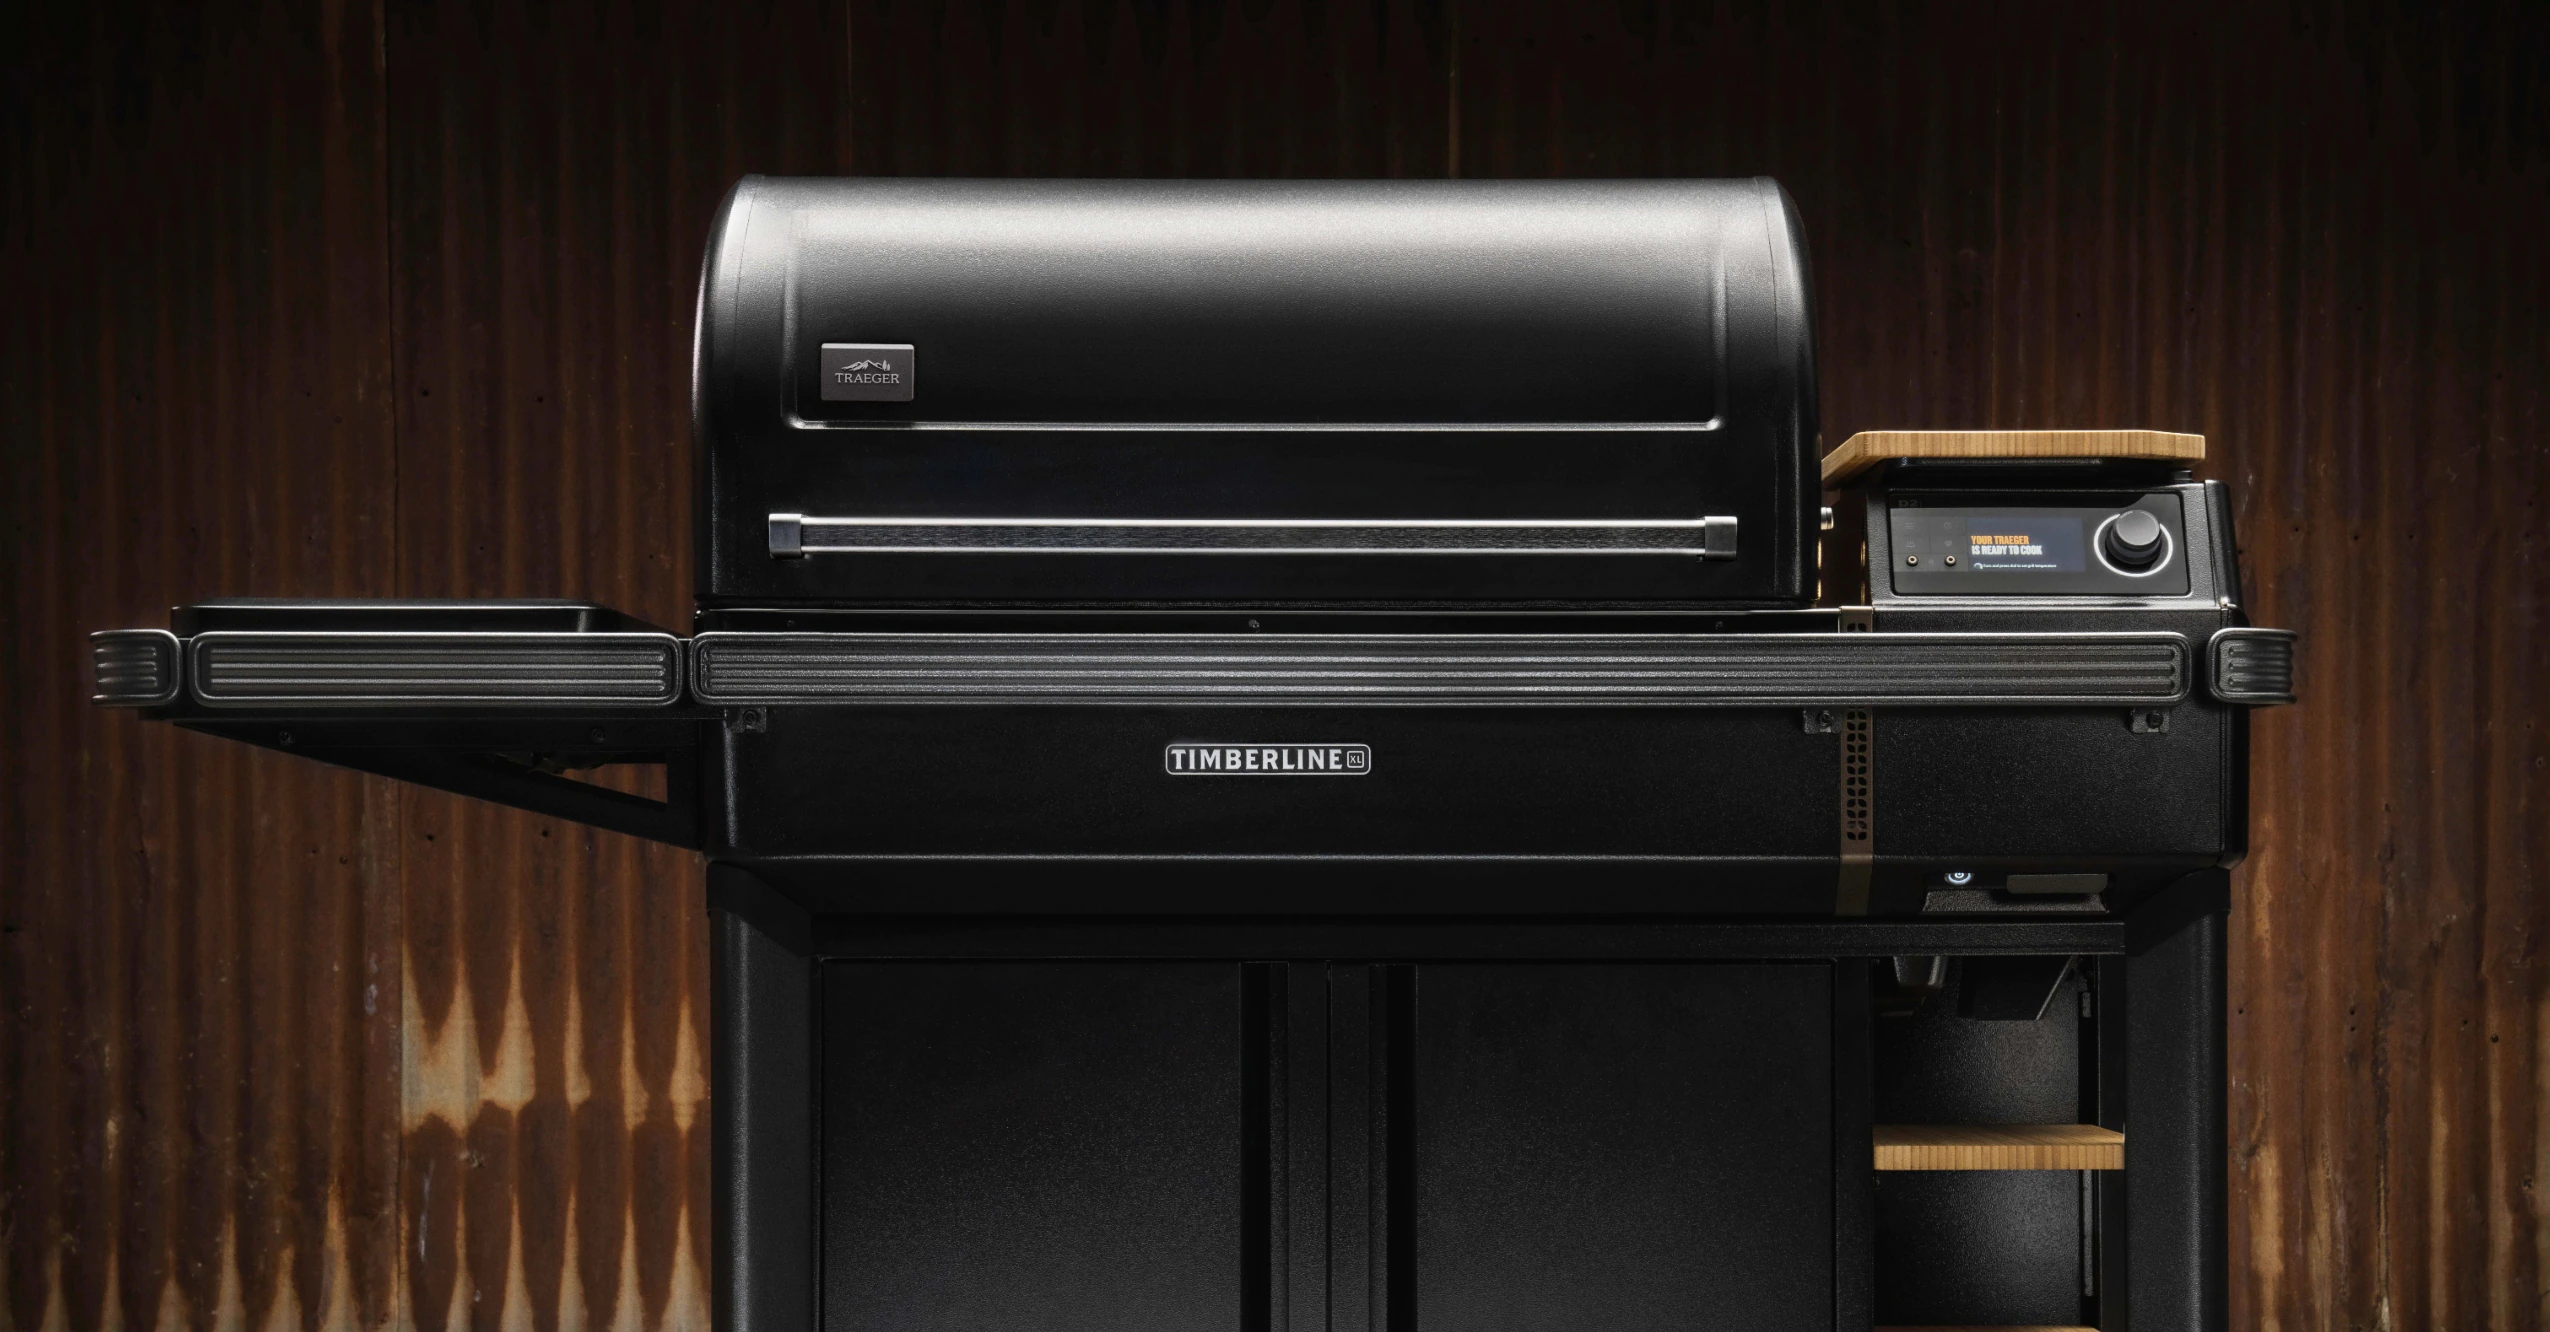 Traeger’s New Timberline Grill Upgrades Wood Pellet Cooking With Touchscreens And A ‘FreeFlow’ Firepot